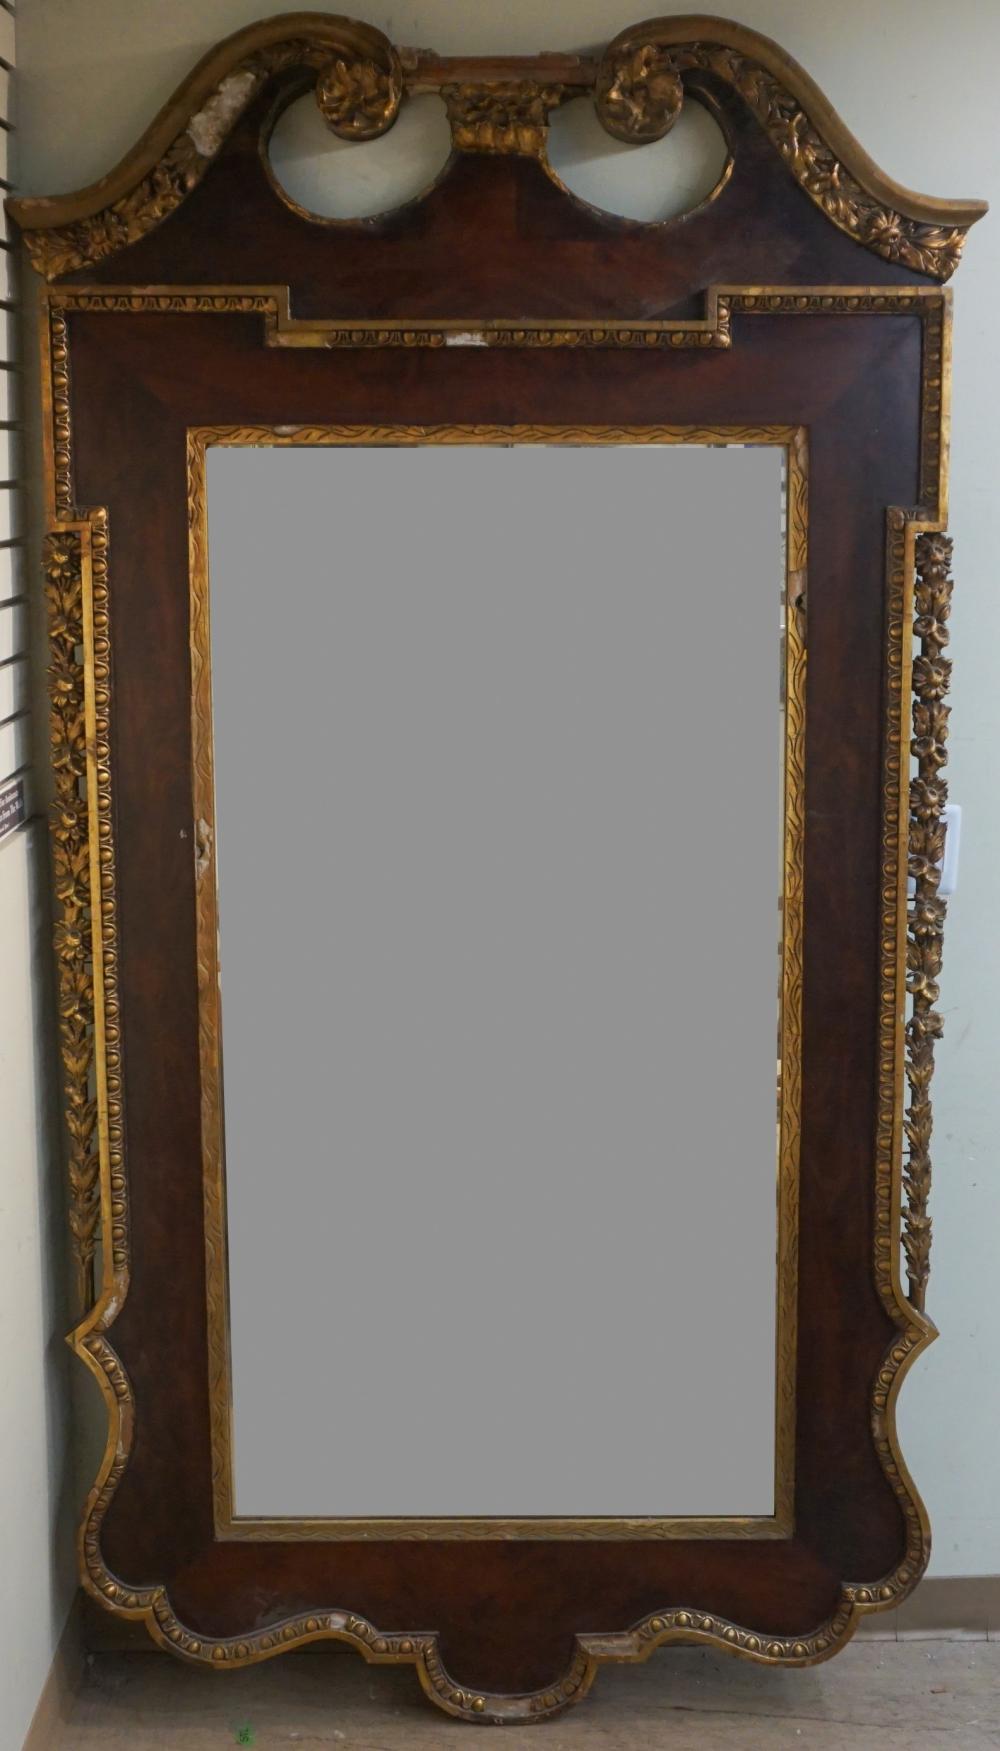 CHIPPENDALE STYLE PARTIAL GILT